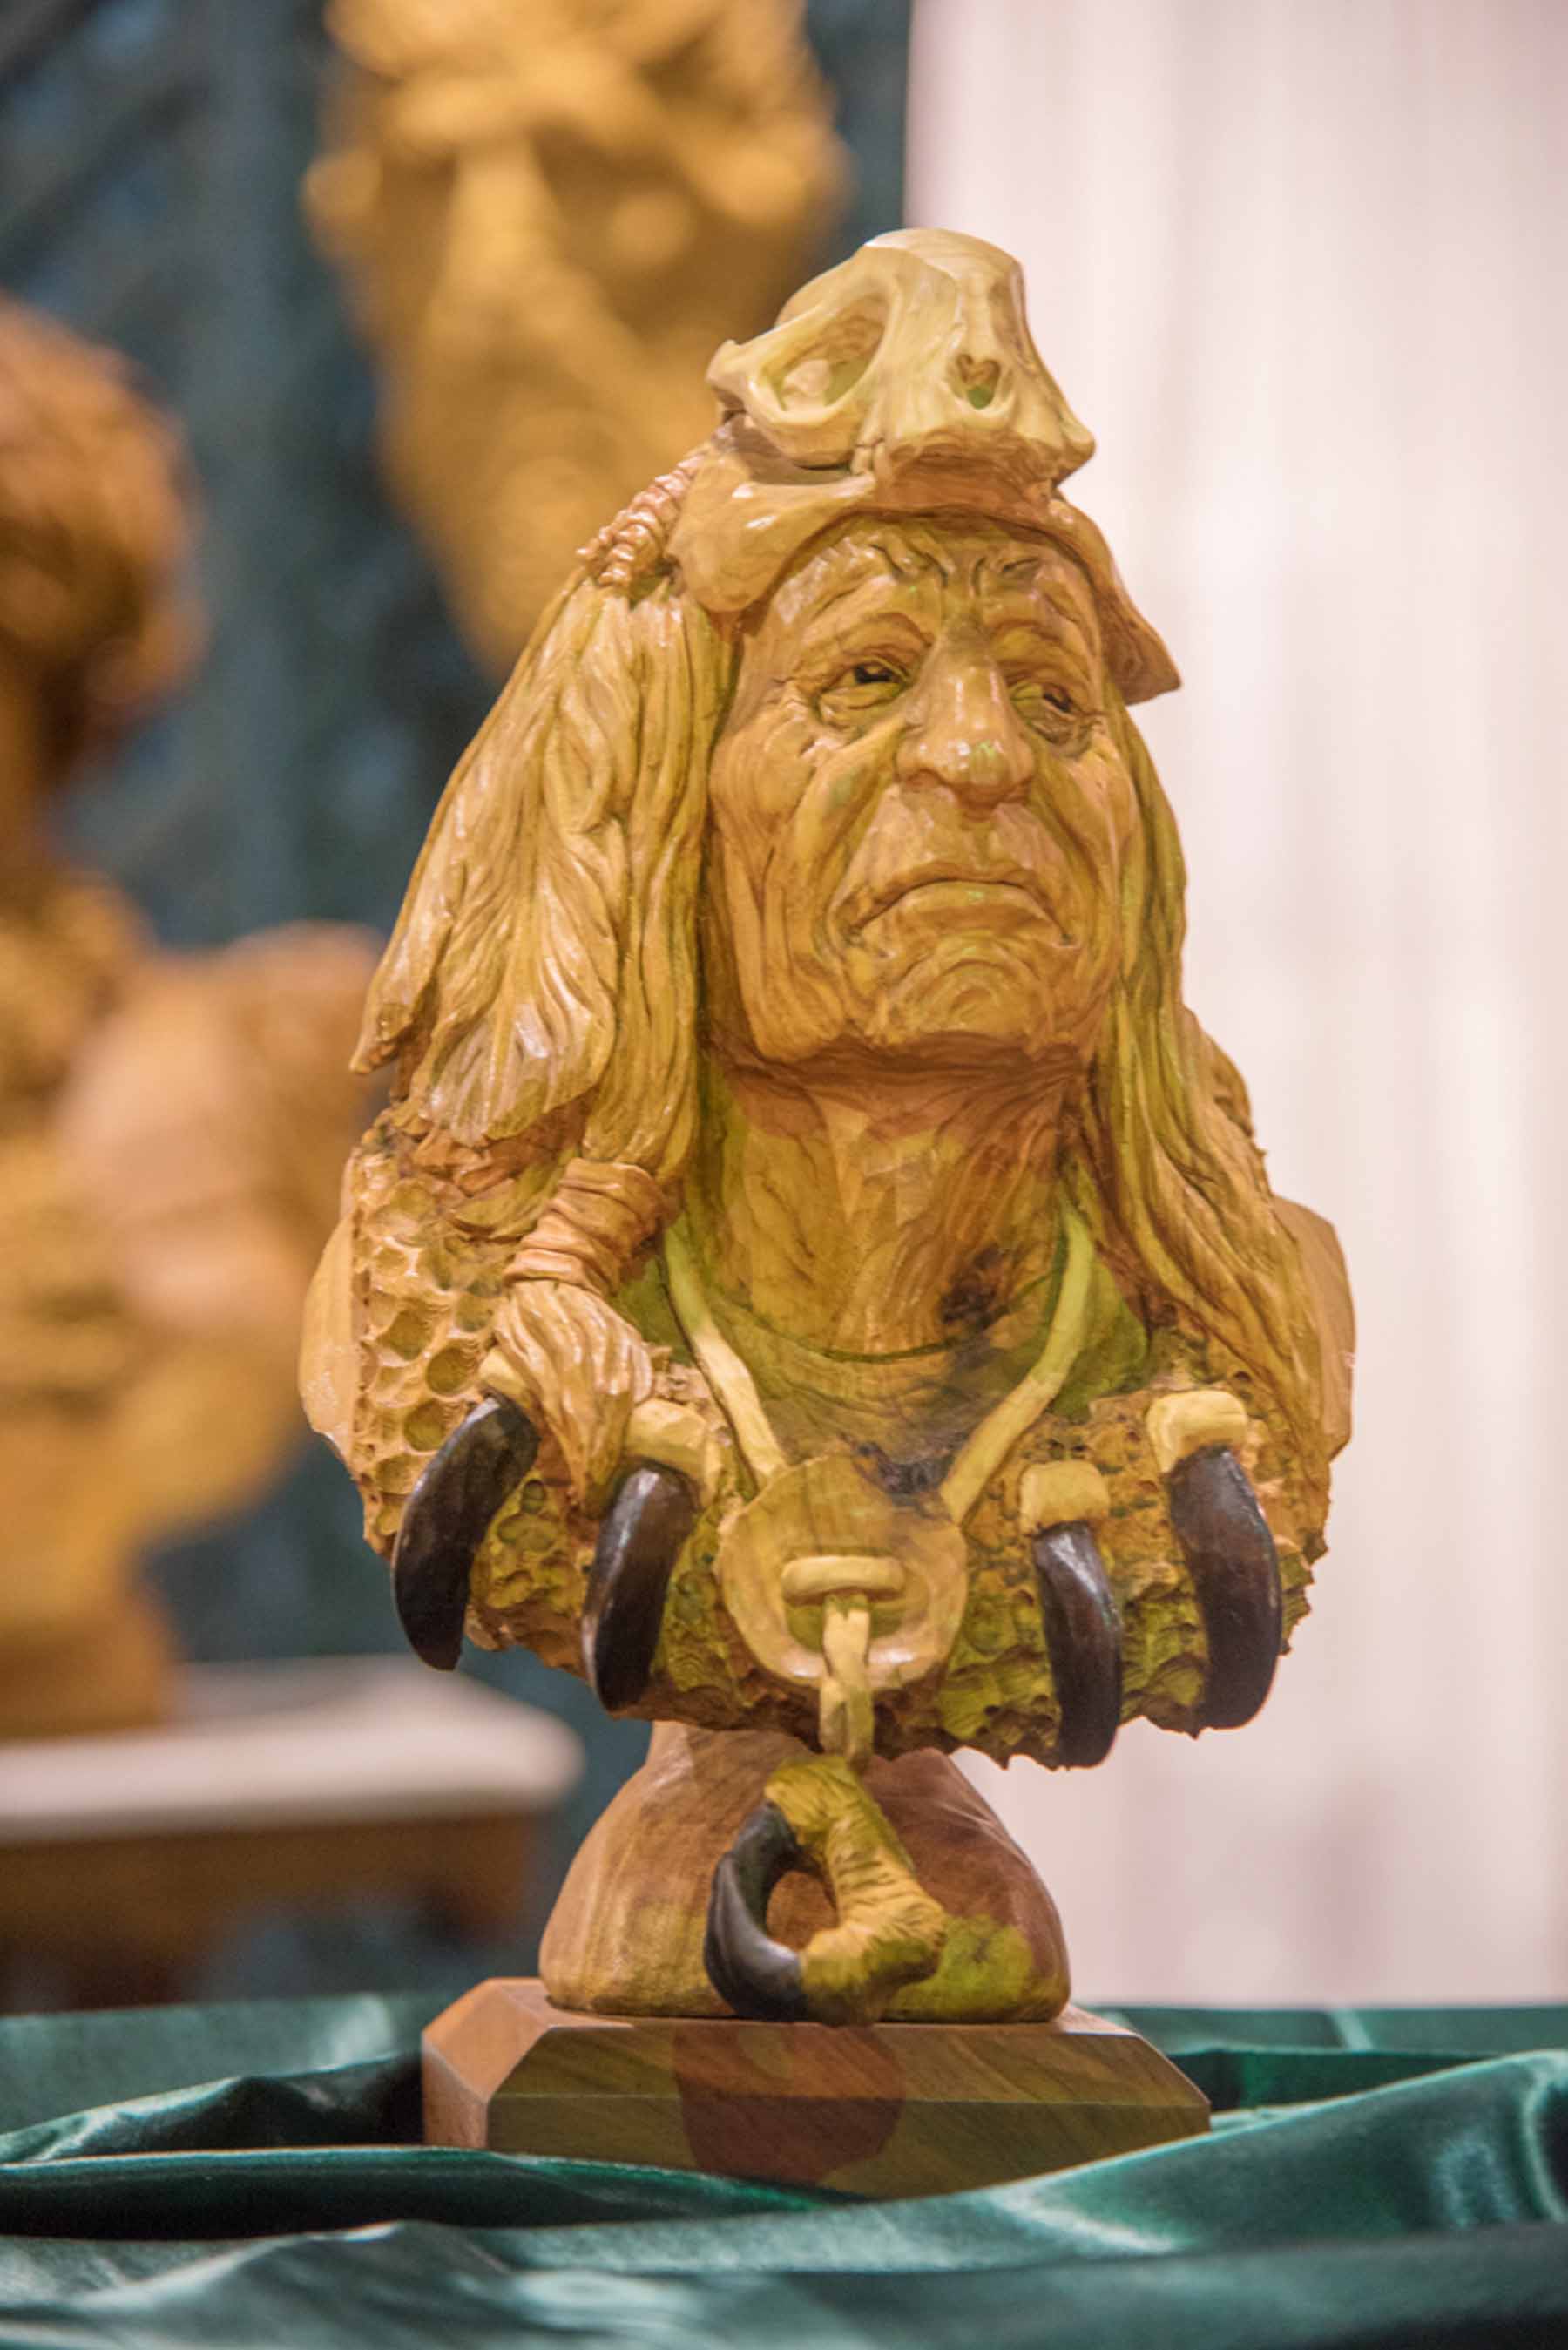 2015 Artistry in Wood, Dayton carving show. Show and candid photos. Feature exhibit with Vic Hood.